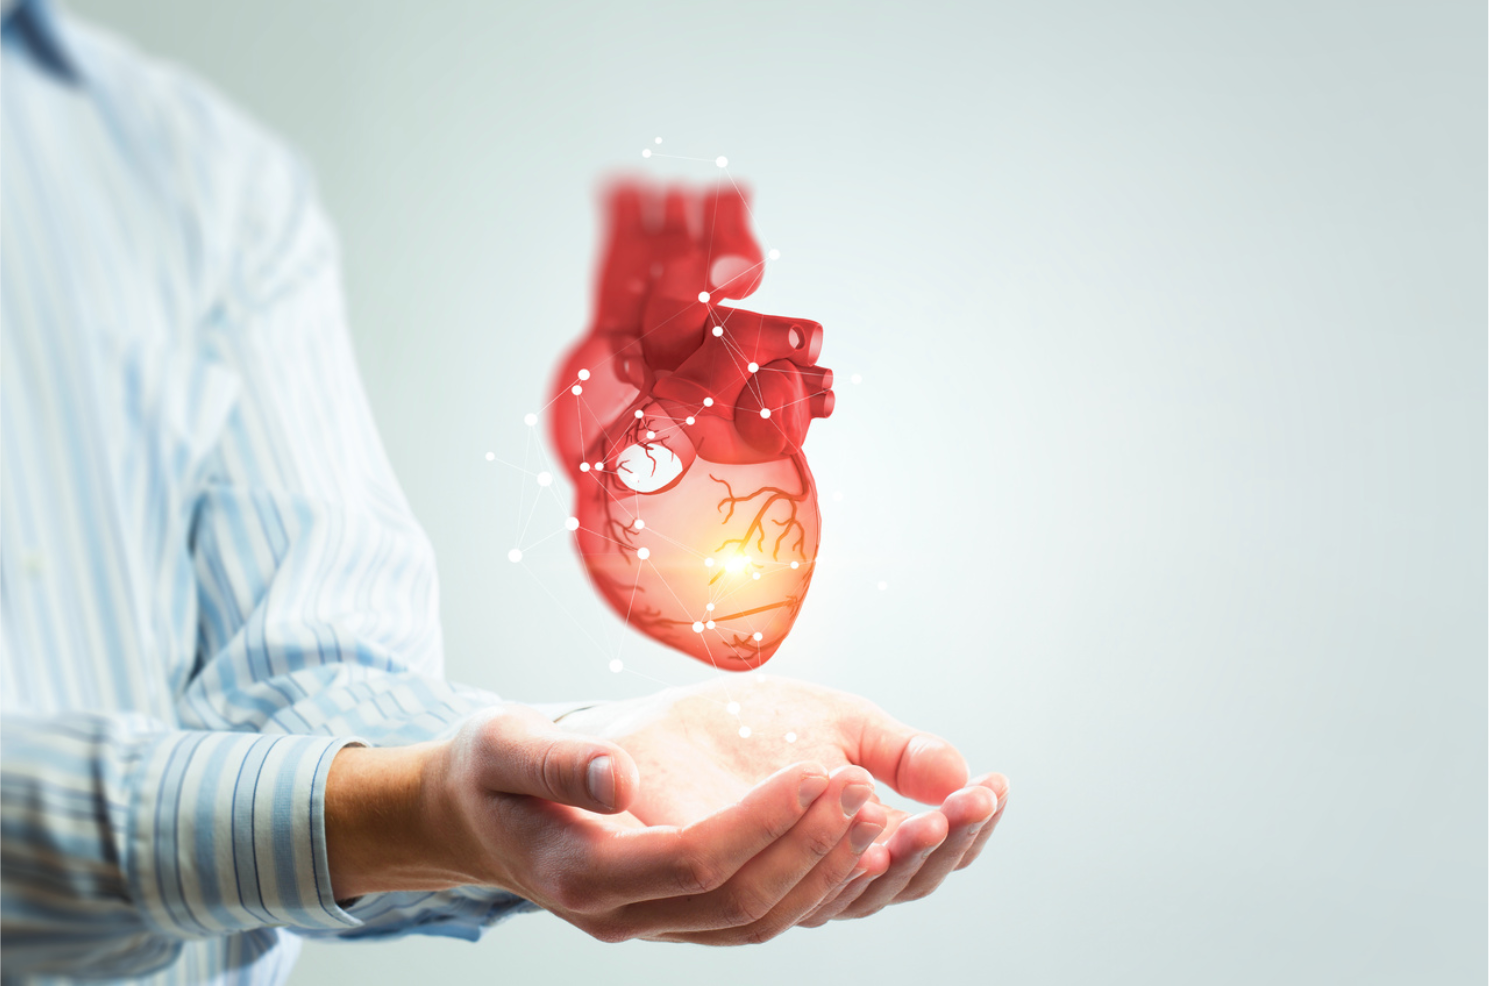 New Pharmacologic Agents, Guidelines Can Further Progress Heart Failure Therapies